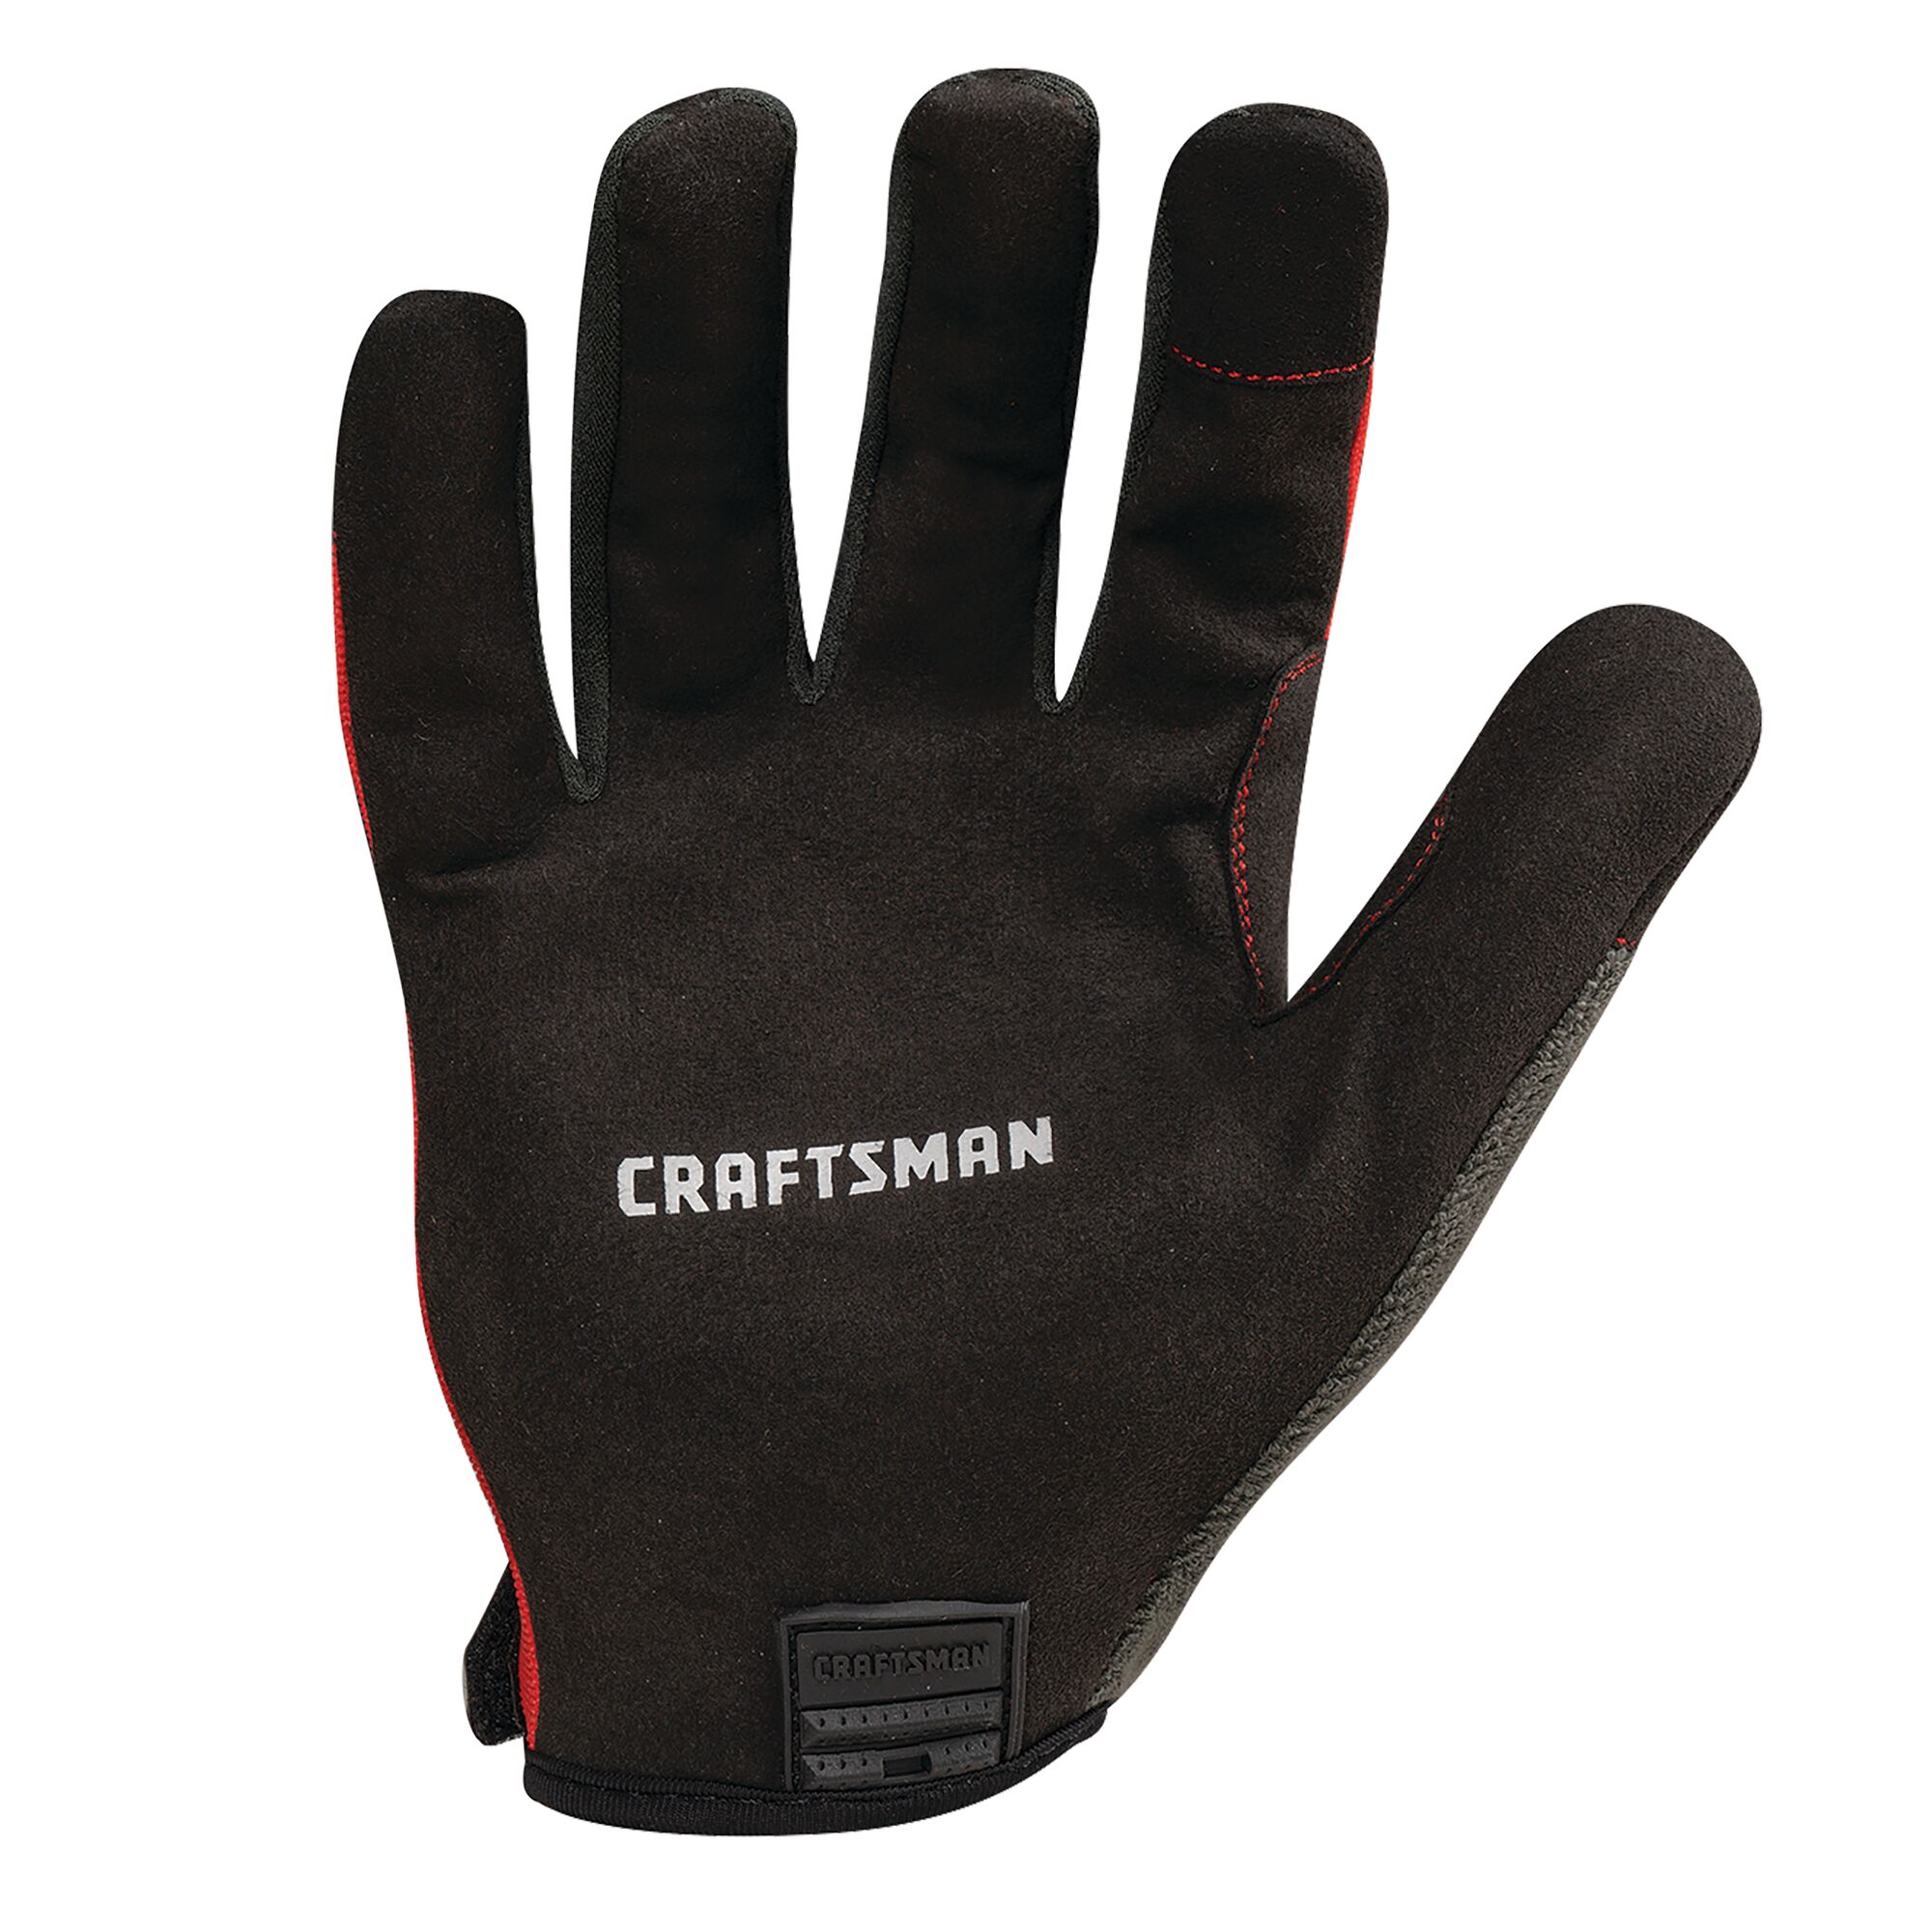 View of CRAFTSMAN Workwear: Gloves & Mitts on white background